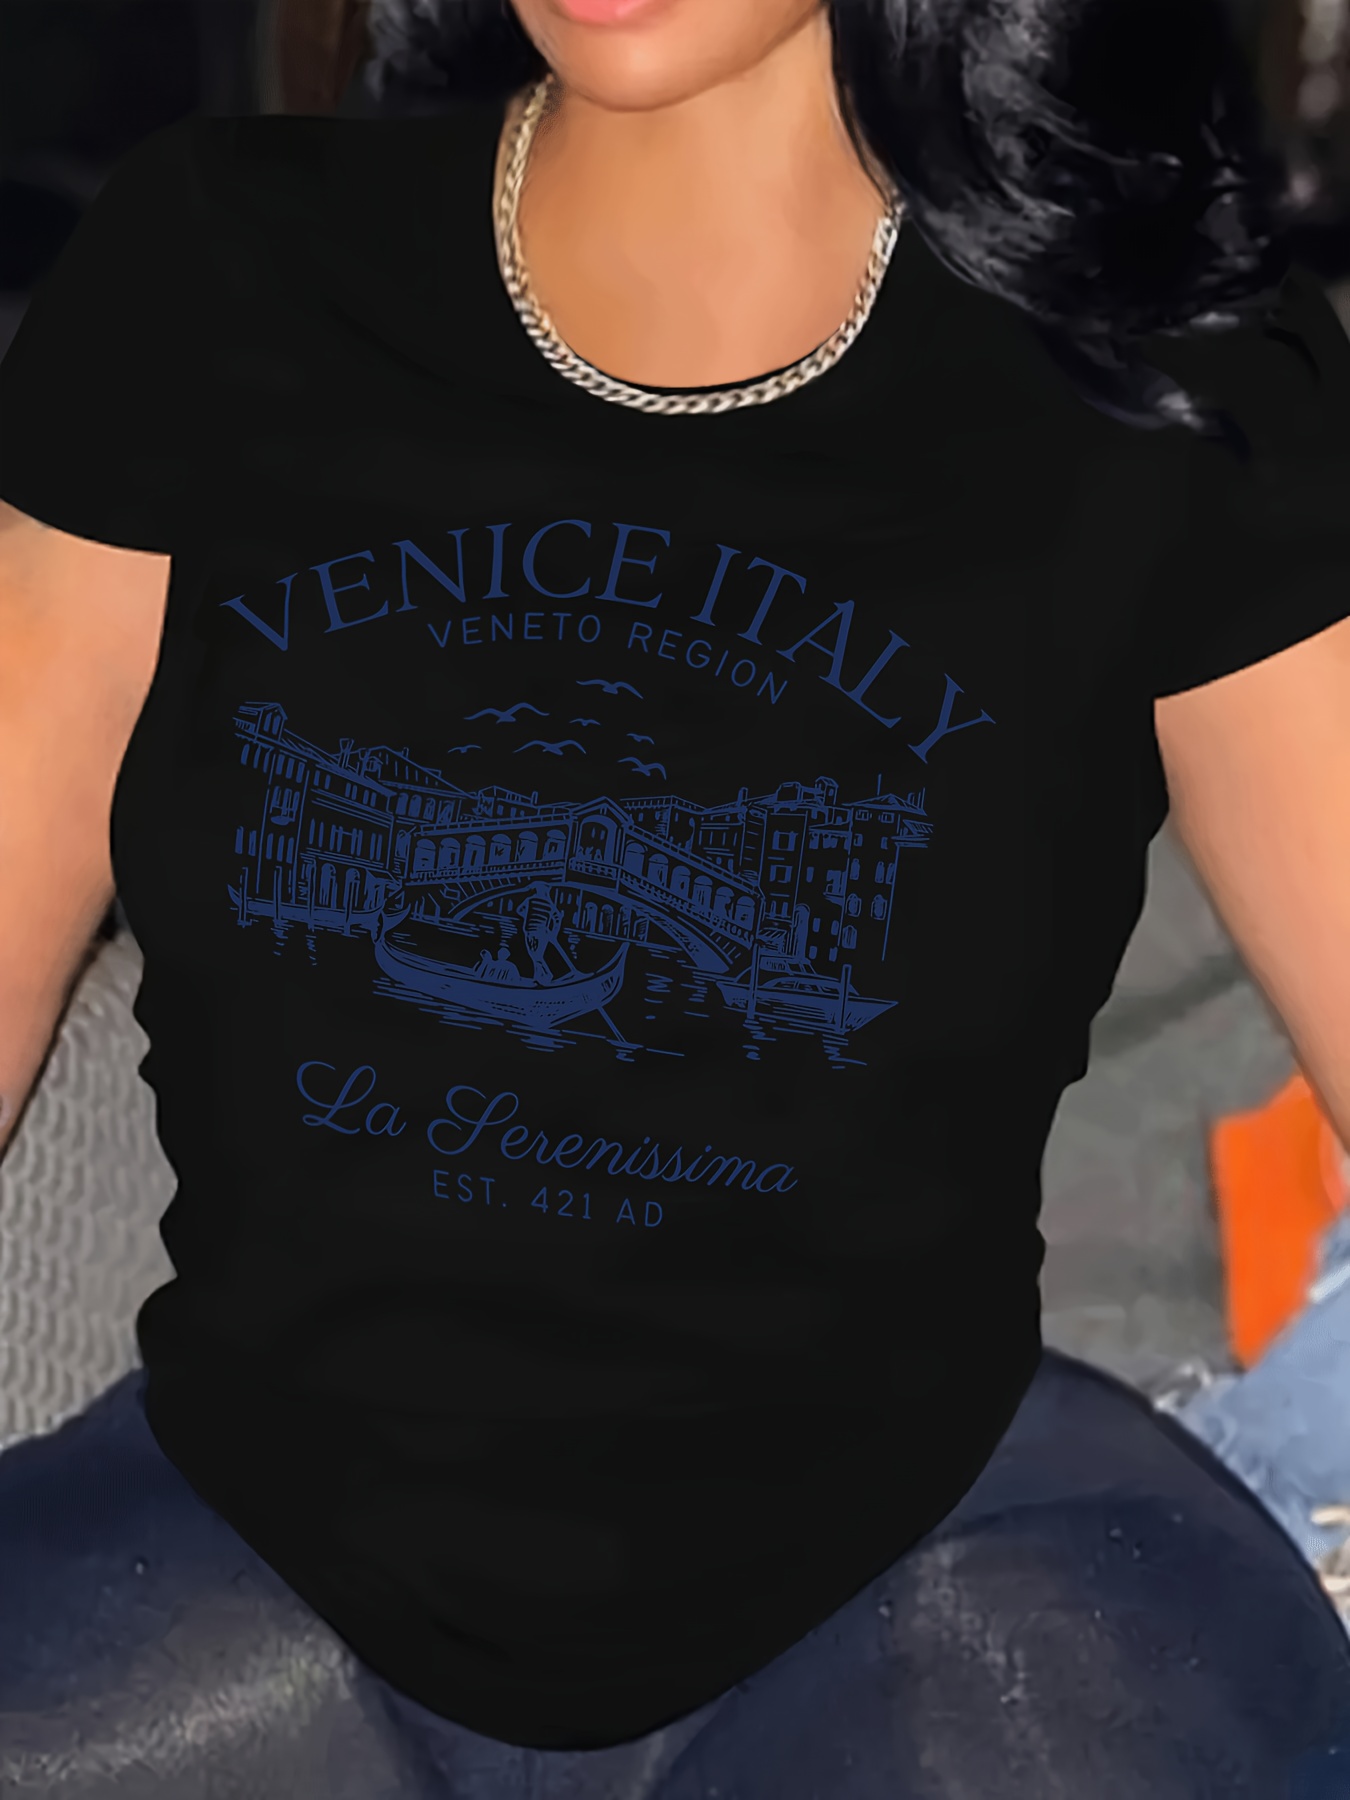 Women s Plus Size Casual Sporty T-Shirt, Venice Italy Print, Comfort Fit Short Sleeve Tee, Fashion Breathable Casual Top